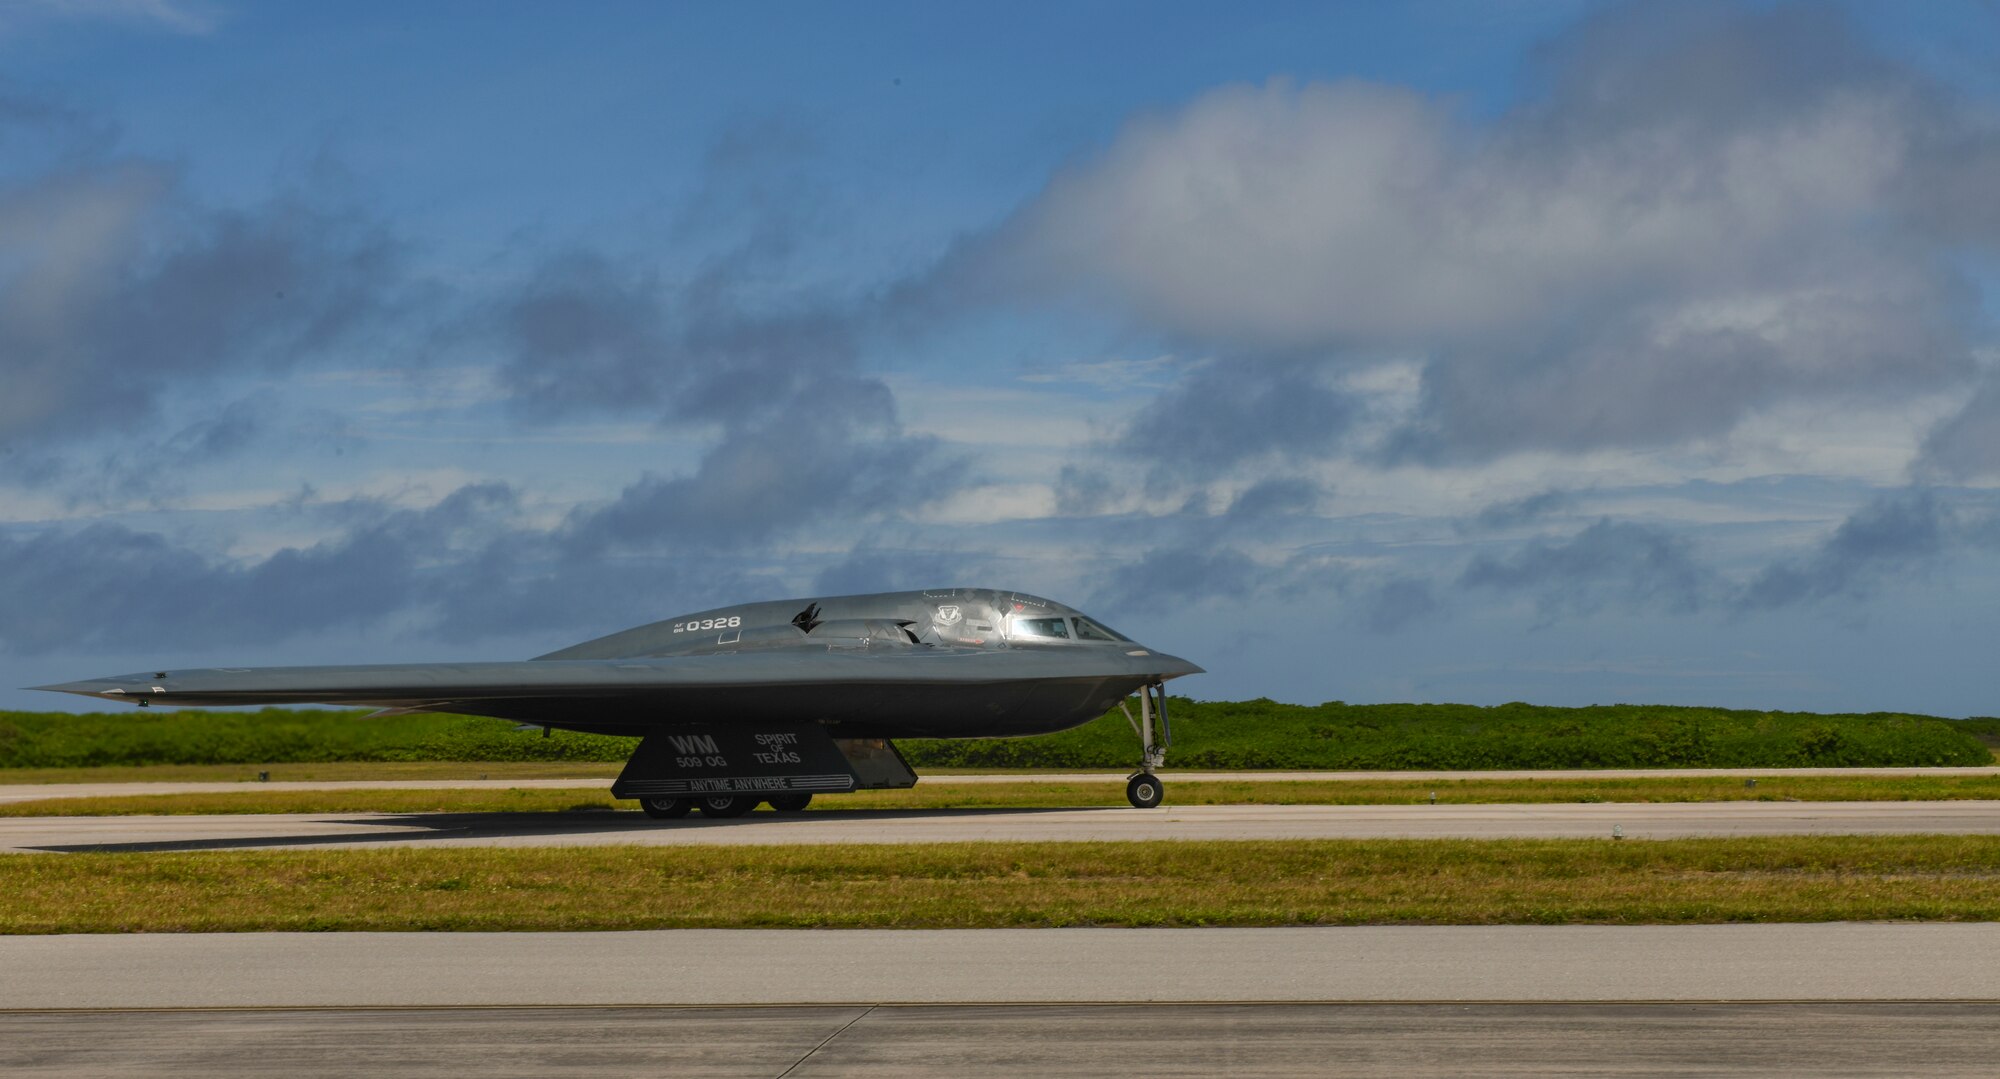 A B-2 Spirit Stealth Bomber, deployed from Whiteman Air Force Base, Missouri, taxis for take off at Naval Support Facility Diego Garcia, in support of a Bomber Task Force mission, August 26, 2020. BTF missions allow U.S. Strategic Command to provide persistent, long-term bomber presence to aid in U.S. Indo-Pacific Command’s commitment to a free and open Indo-Pacific. As part of their BTF deployment, the B-2s participated in a combined United States-Australia exercise with Marine Rotational Force-Darwin and Australian Defence Forces. During the exercise, MRF-D and ADF Joint Terminal Attack Controllers coordinated airstrikes with U.S. Air Force B-1B Lancers and B-2 Spirit Stealth Bombers. (U.S Air Force photo by Tech. Sgt. Heather Salazar)